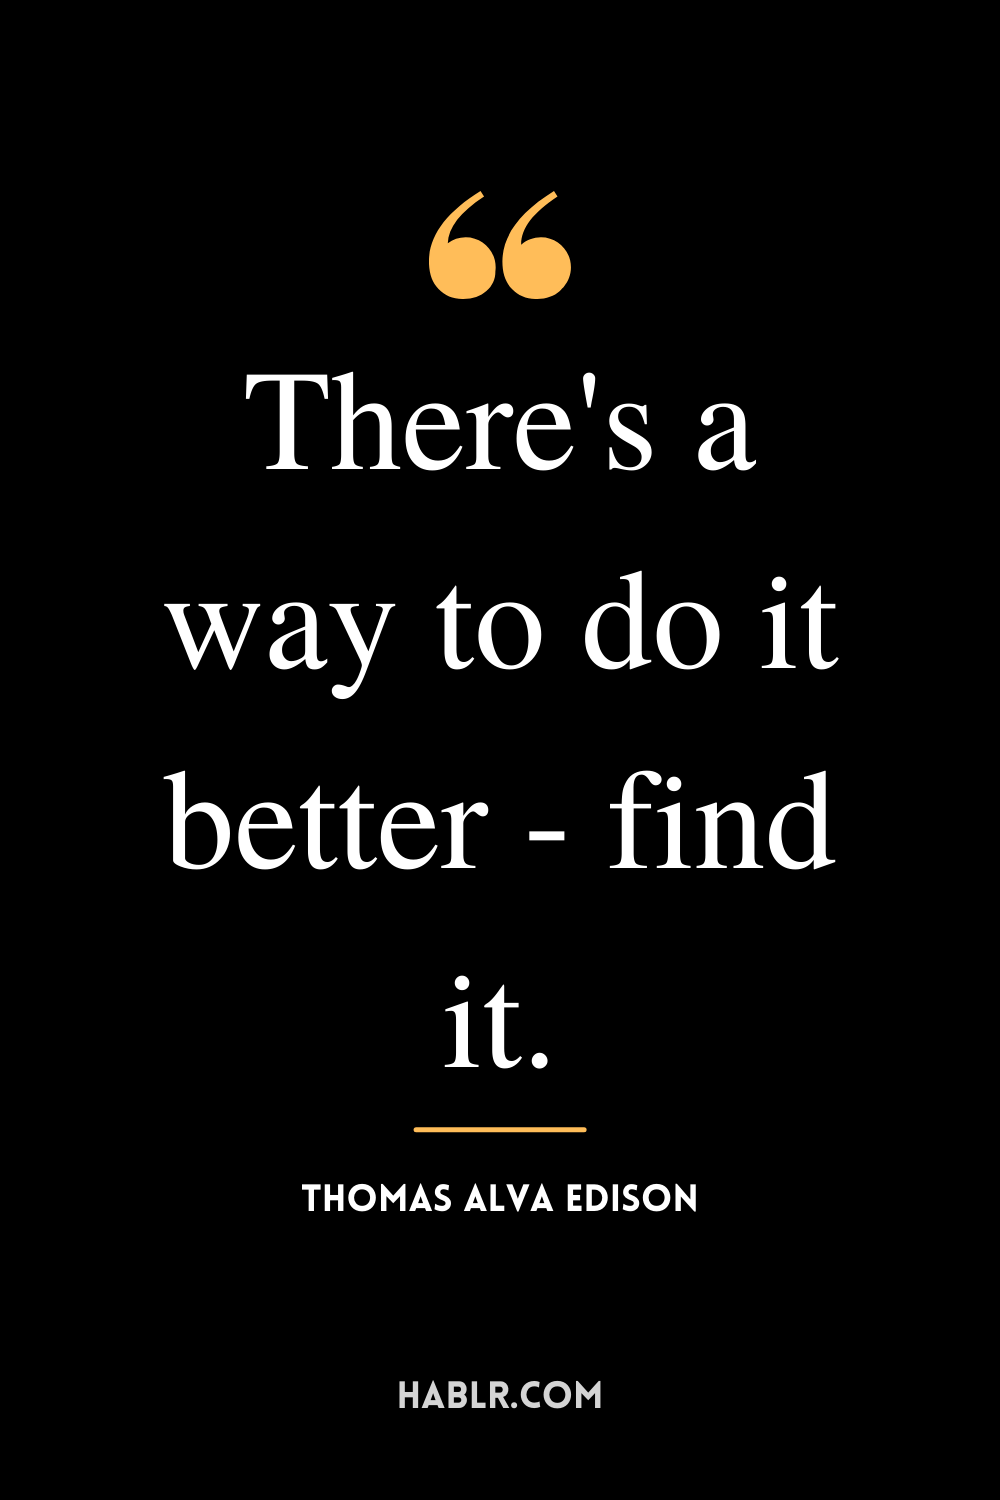 "There's a way to do it better - find it." -Thomas Alva Edison